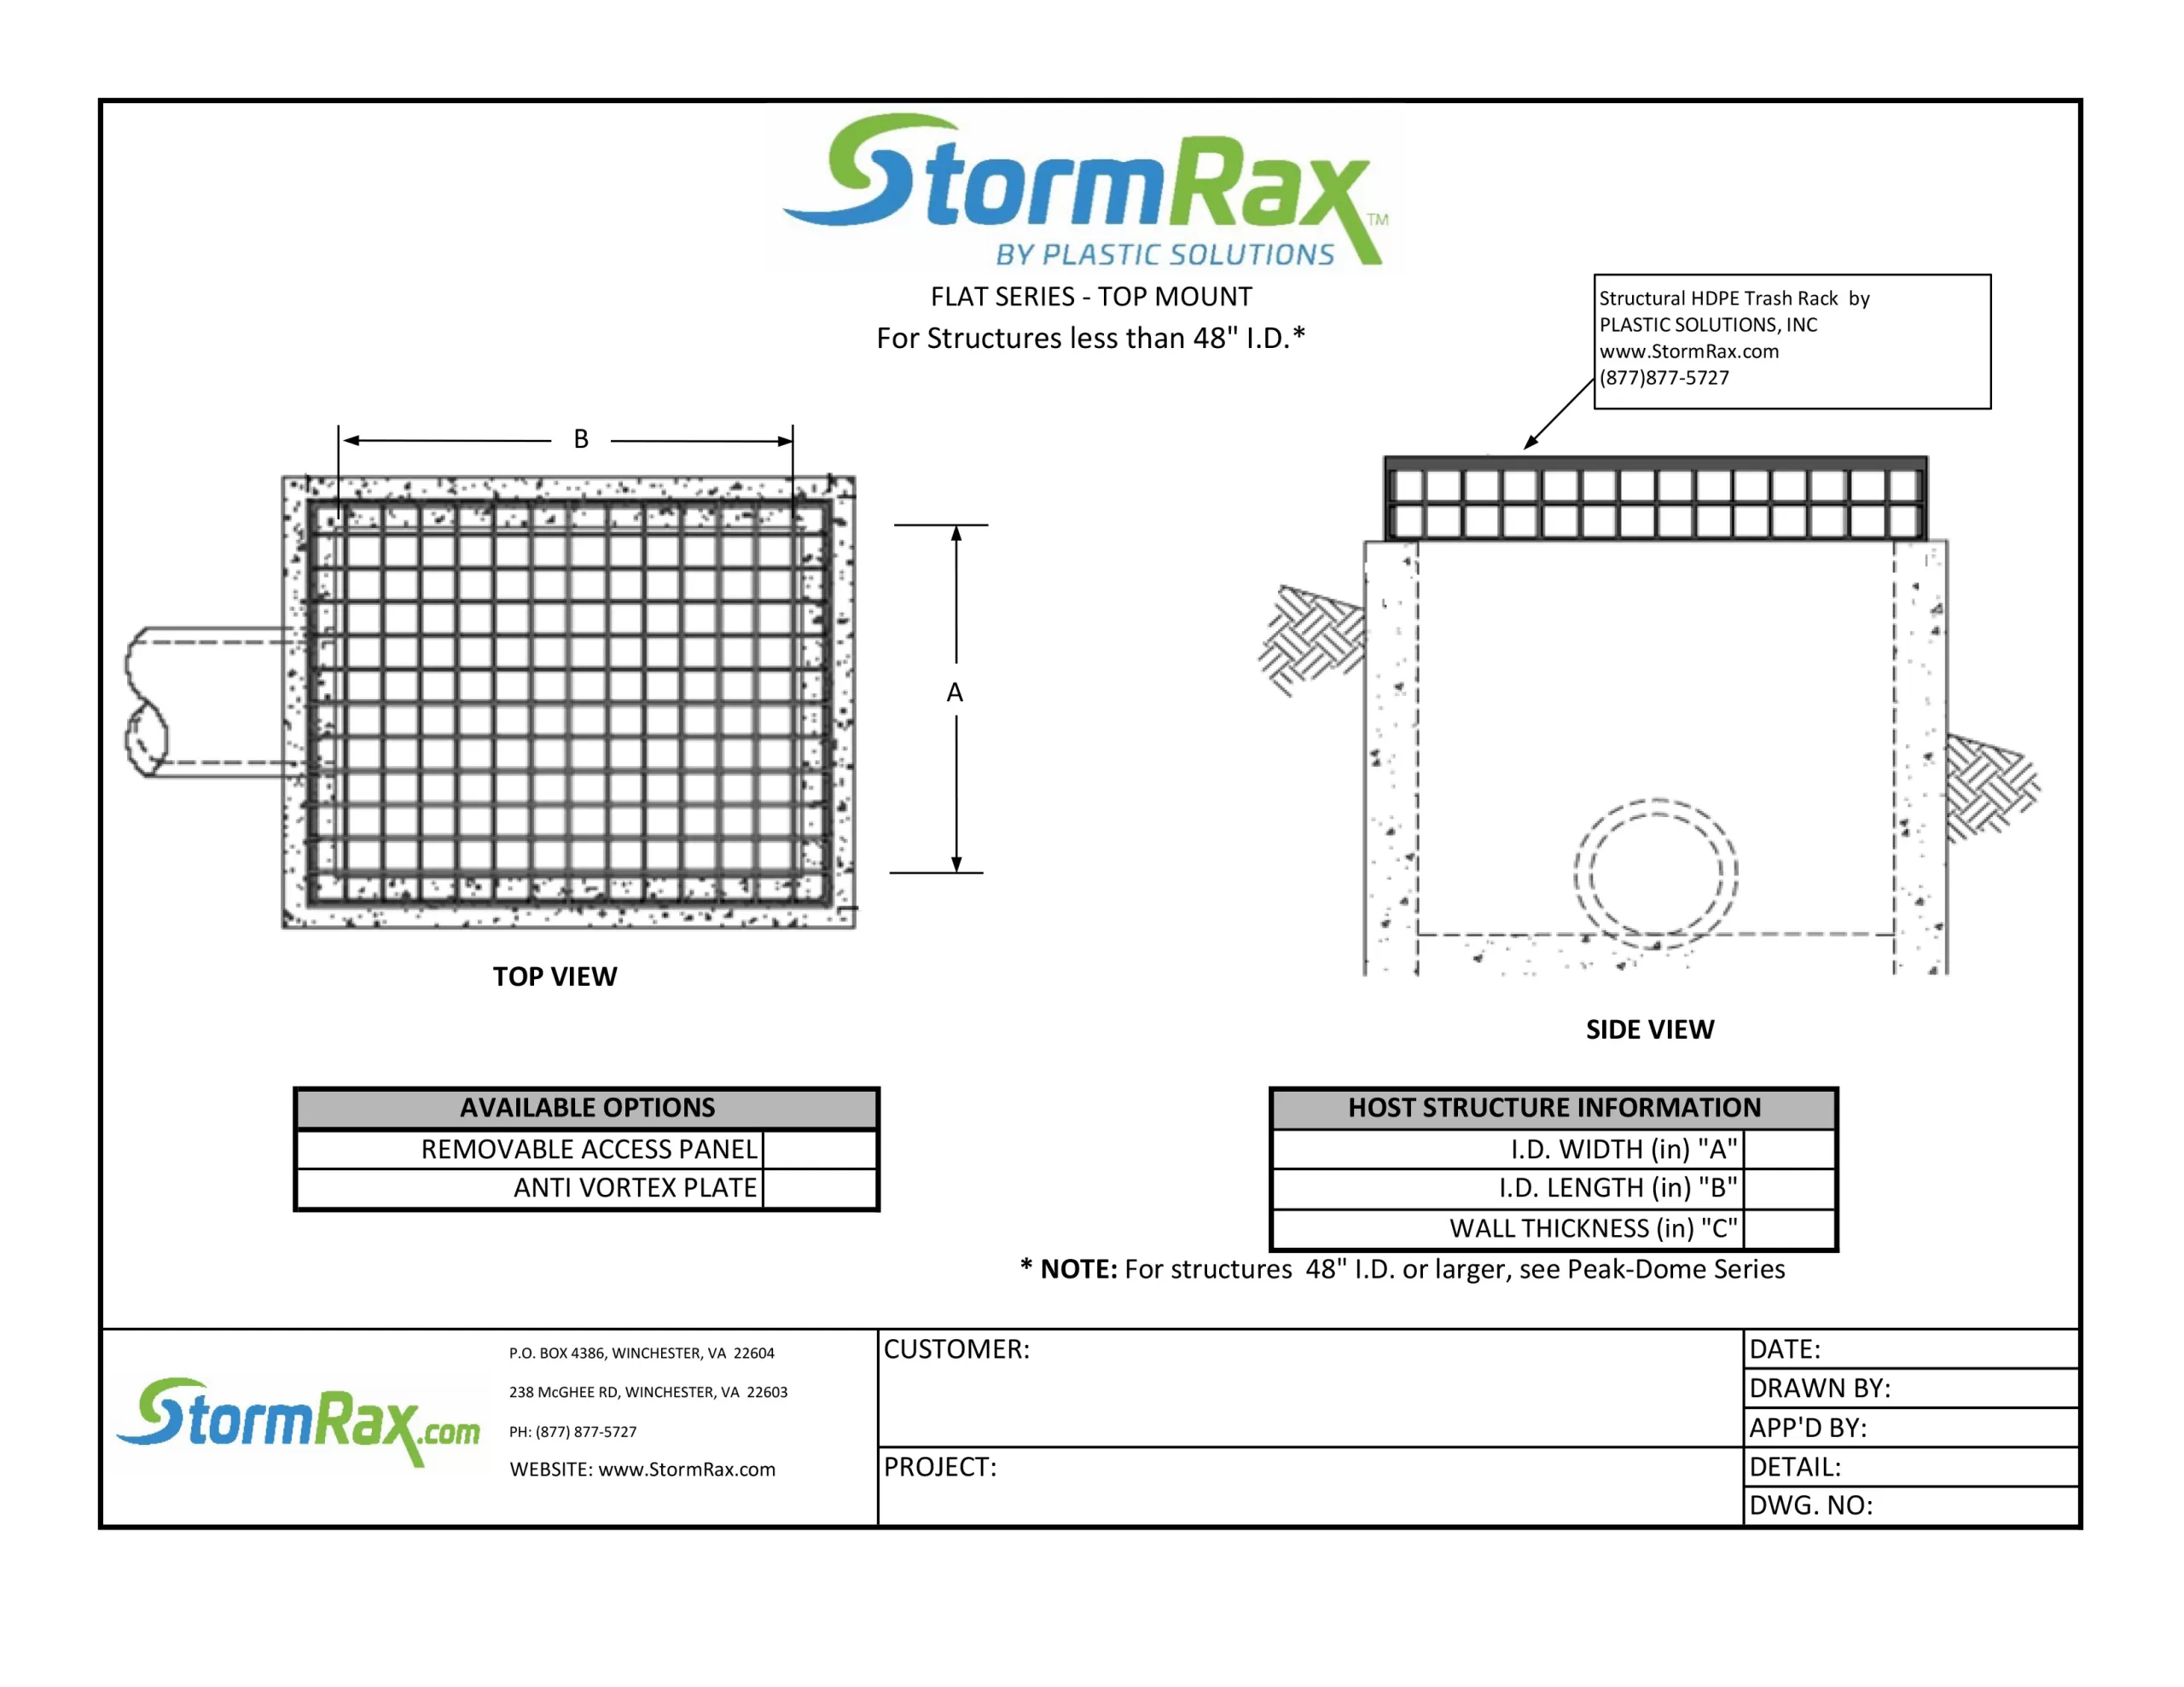 Technical drawing for stormrax flat top mount series